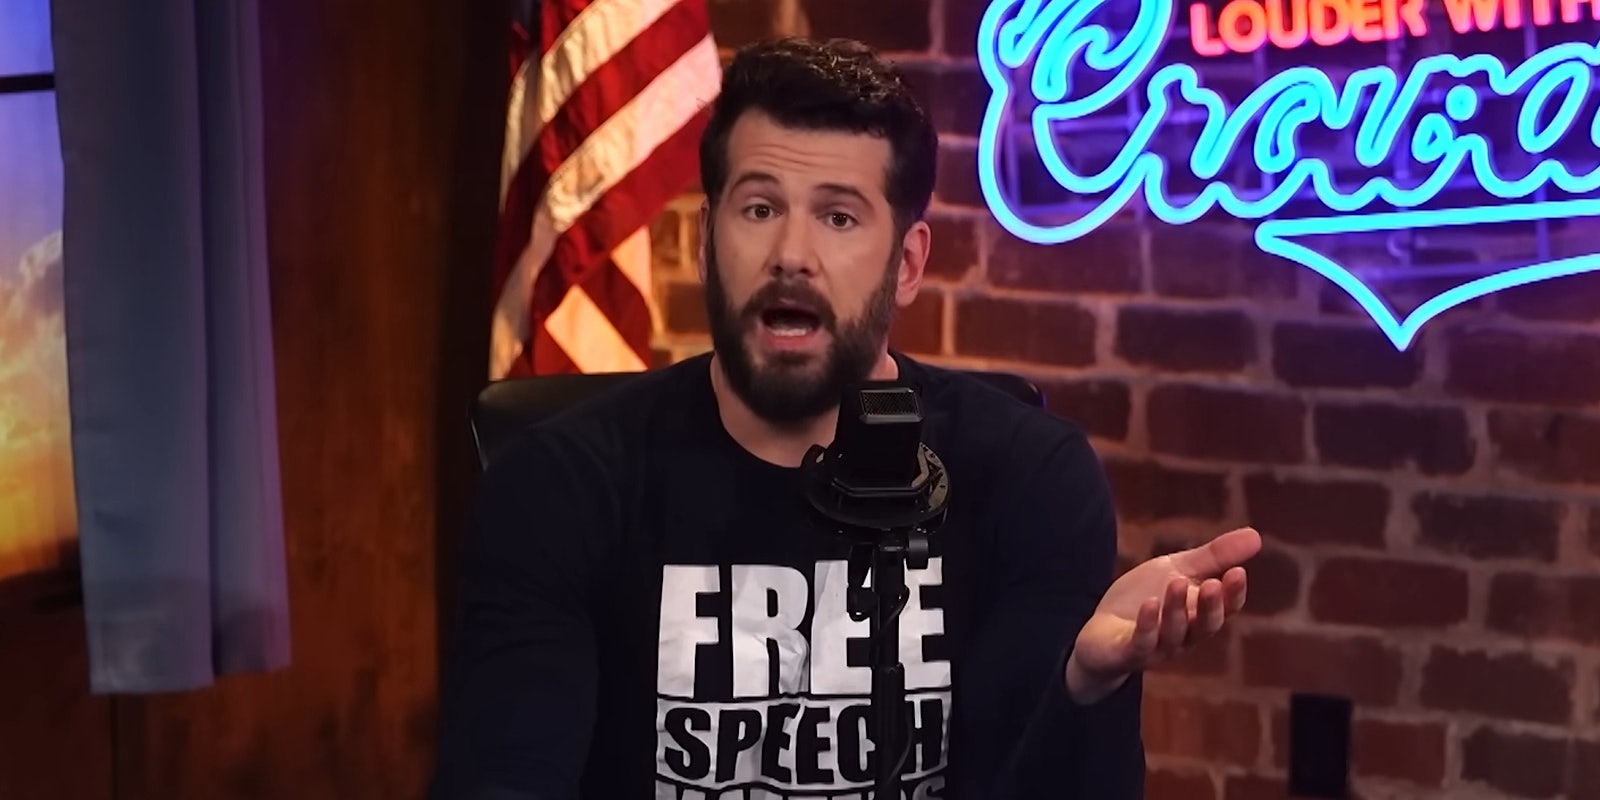 Steven Crowder speaking into microphone in front of brick background